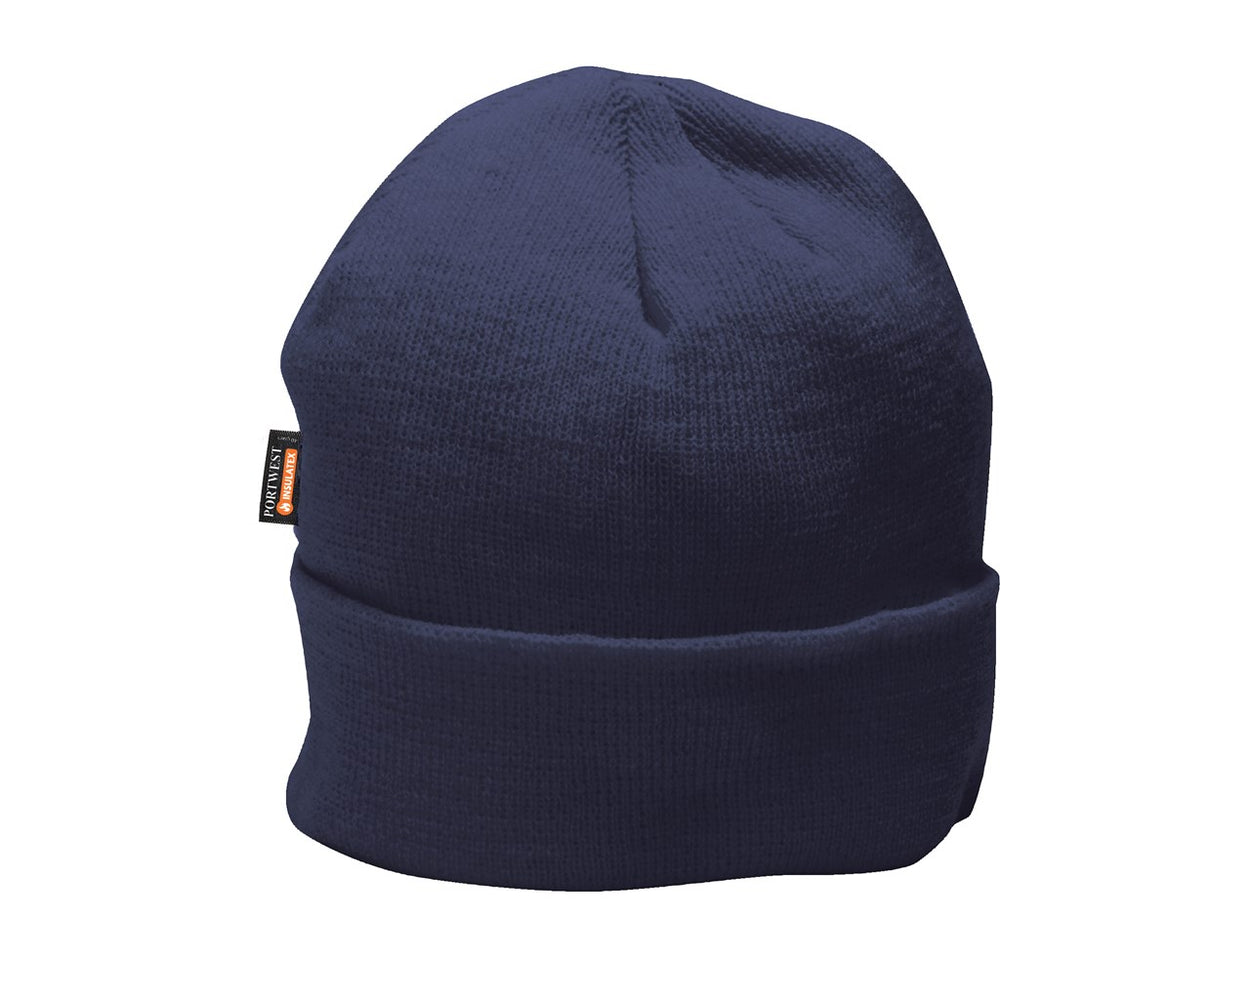 Knit Hat Insulatex Lined Navy BO13NY (SINGLE OR MULTI-PACK)